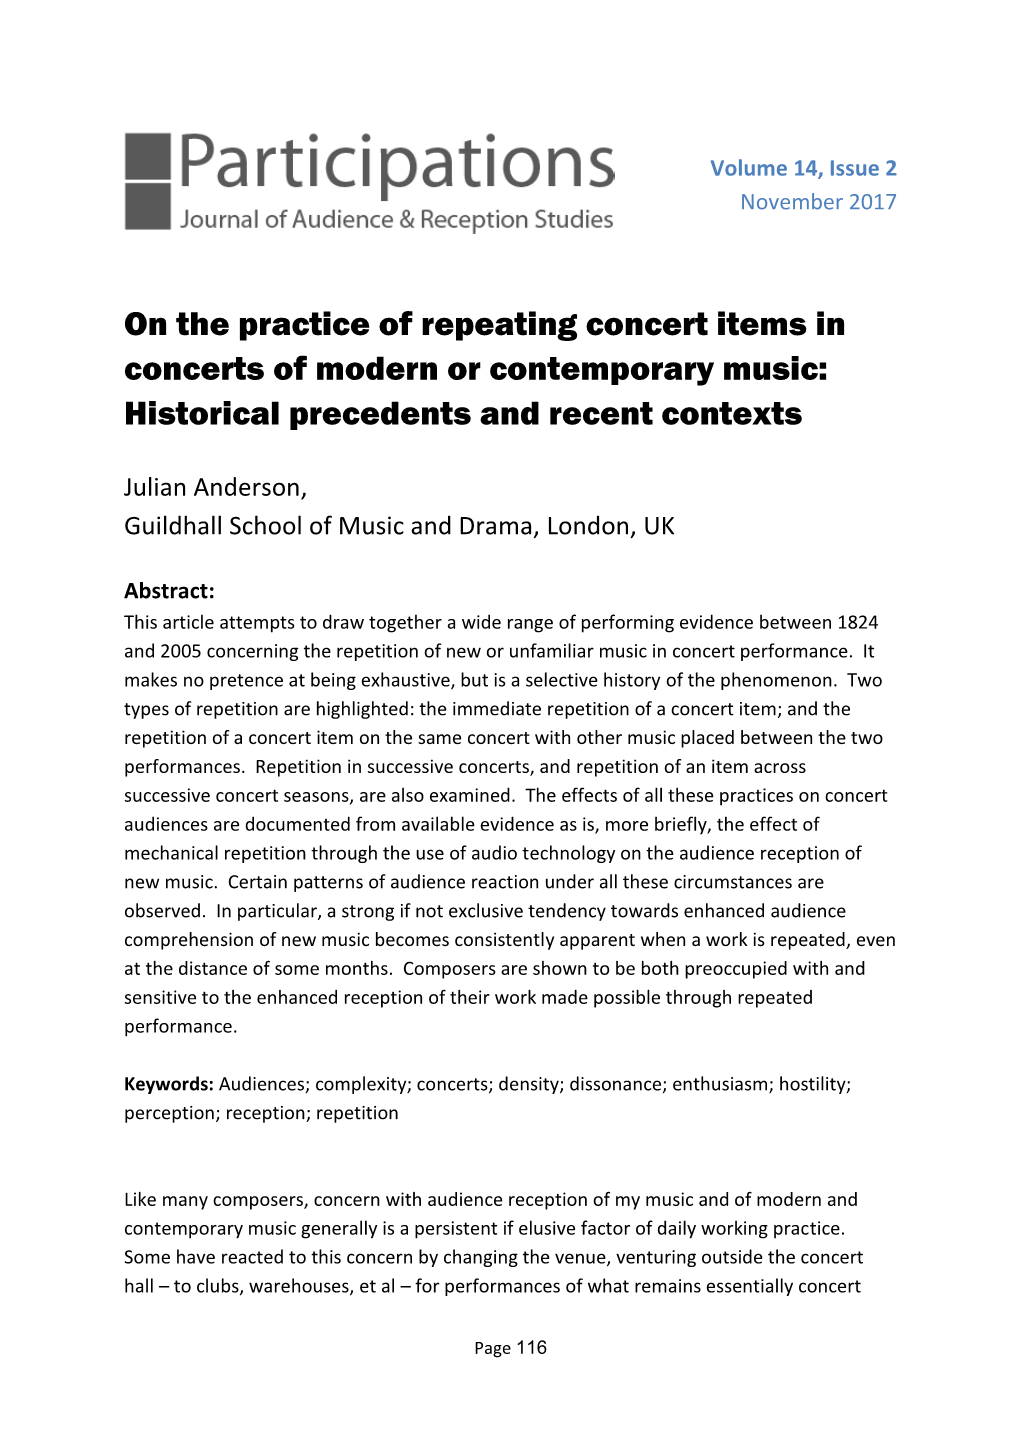 On the Practice of Repeating Concert Items in Concerts of Modern Or Contemporary Music: Historical Precedents and Recent Contexts